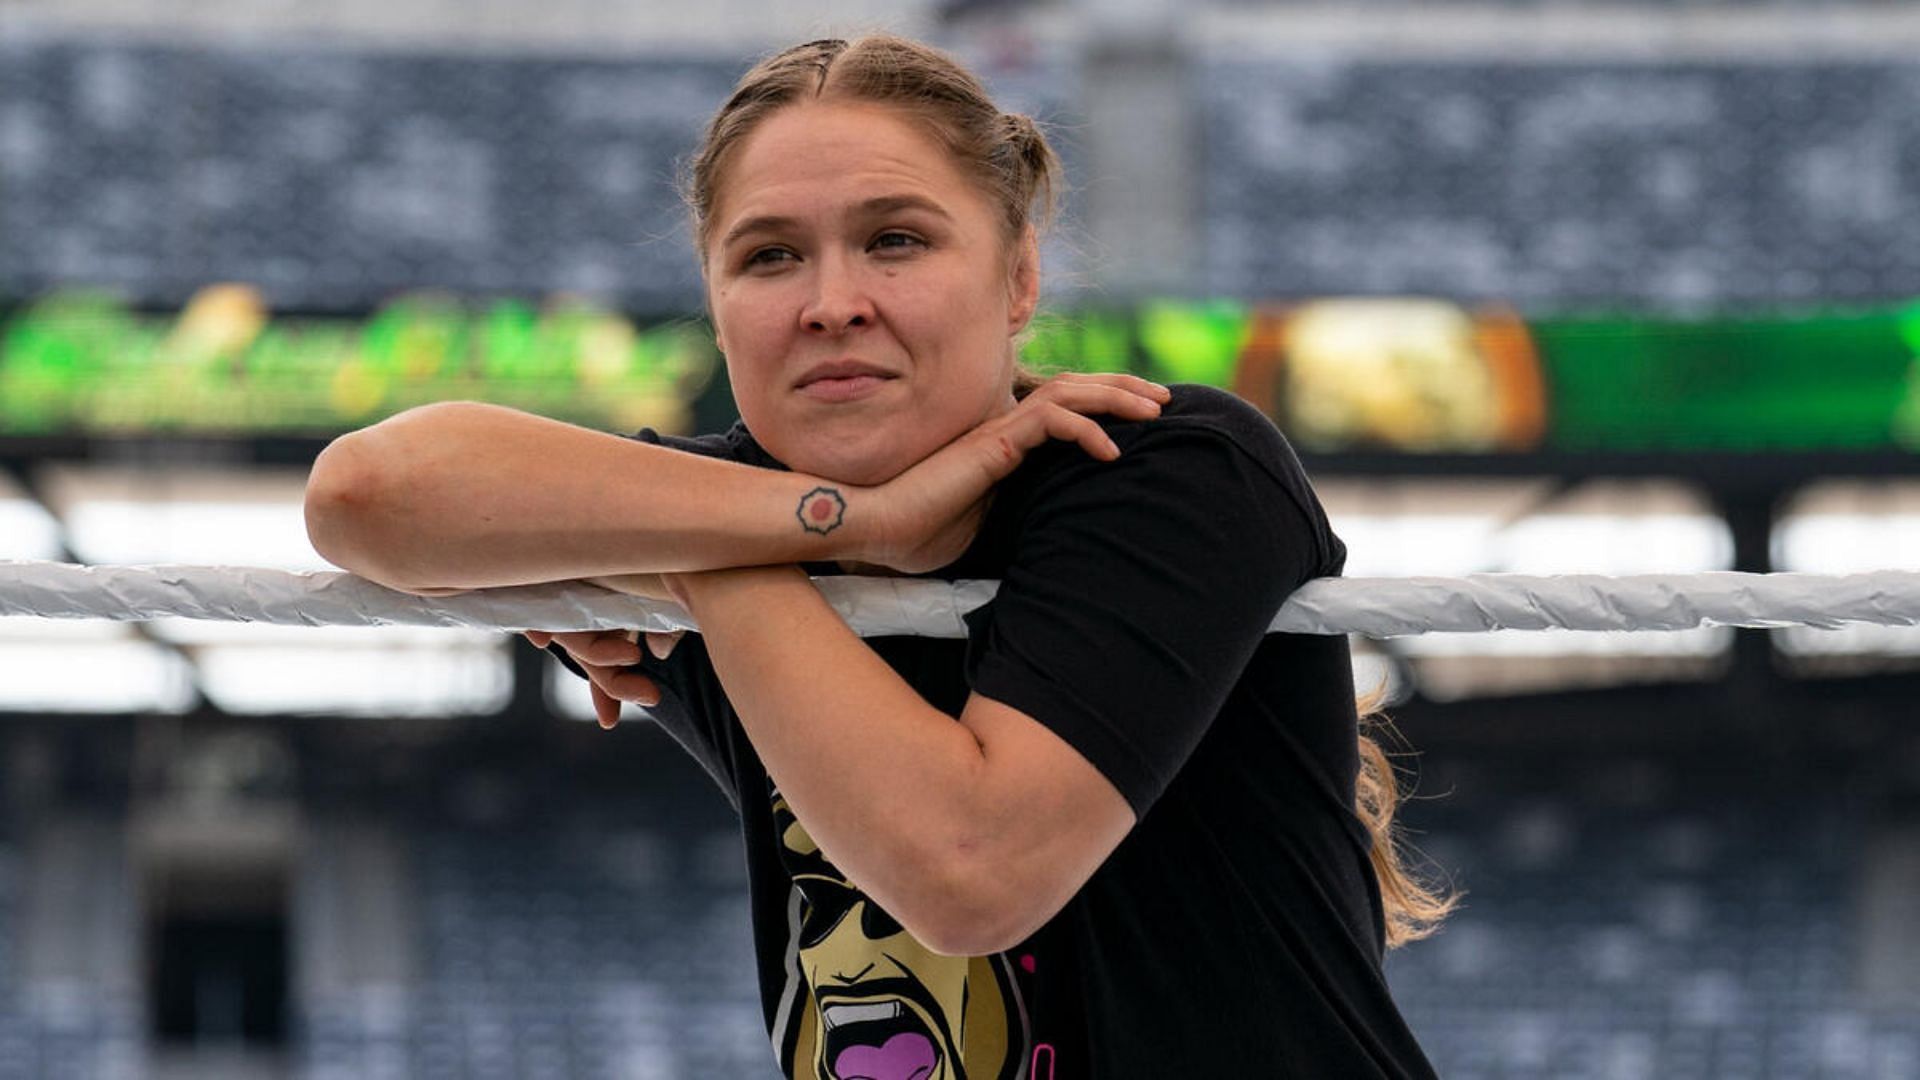 Ronda Rousey has been moved to WWE